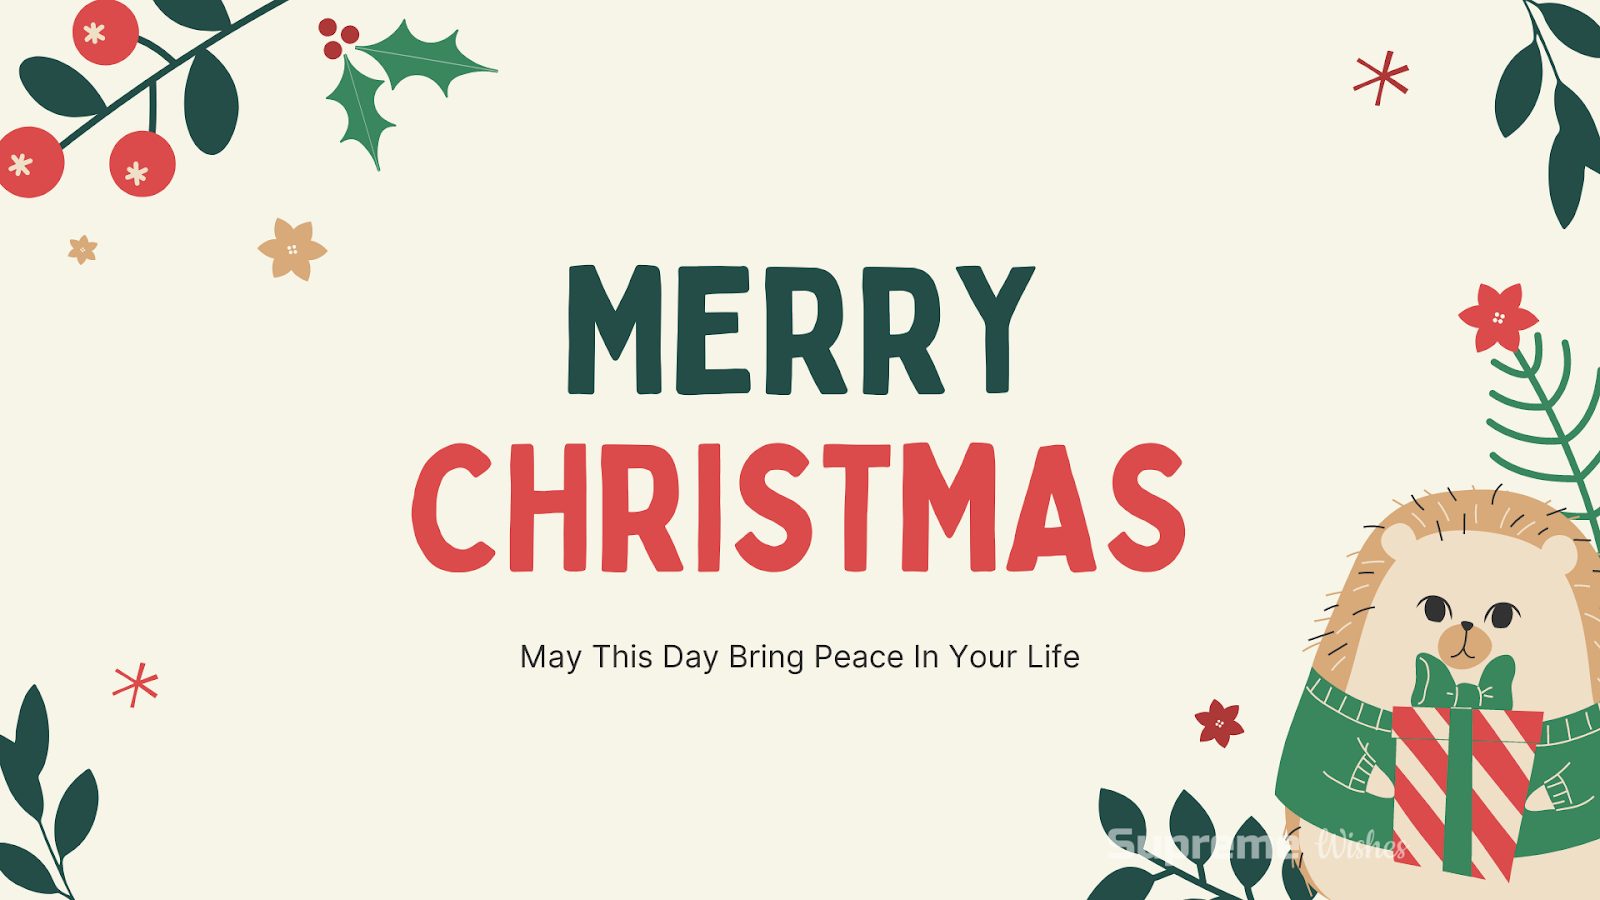 Merry Christmas messages